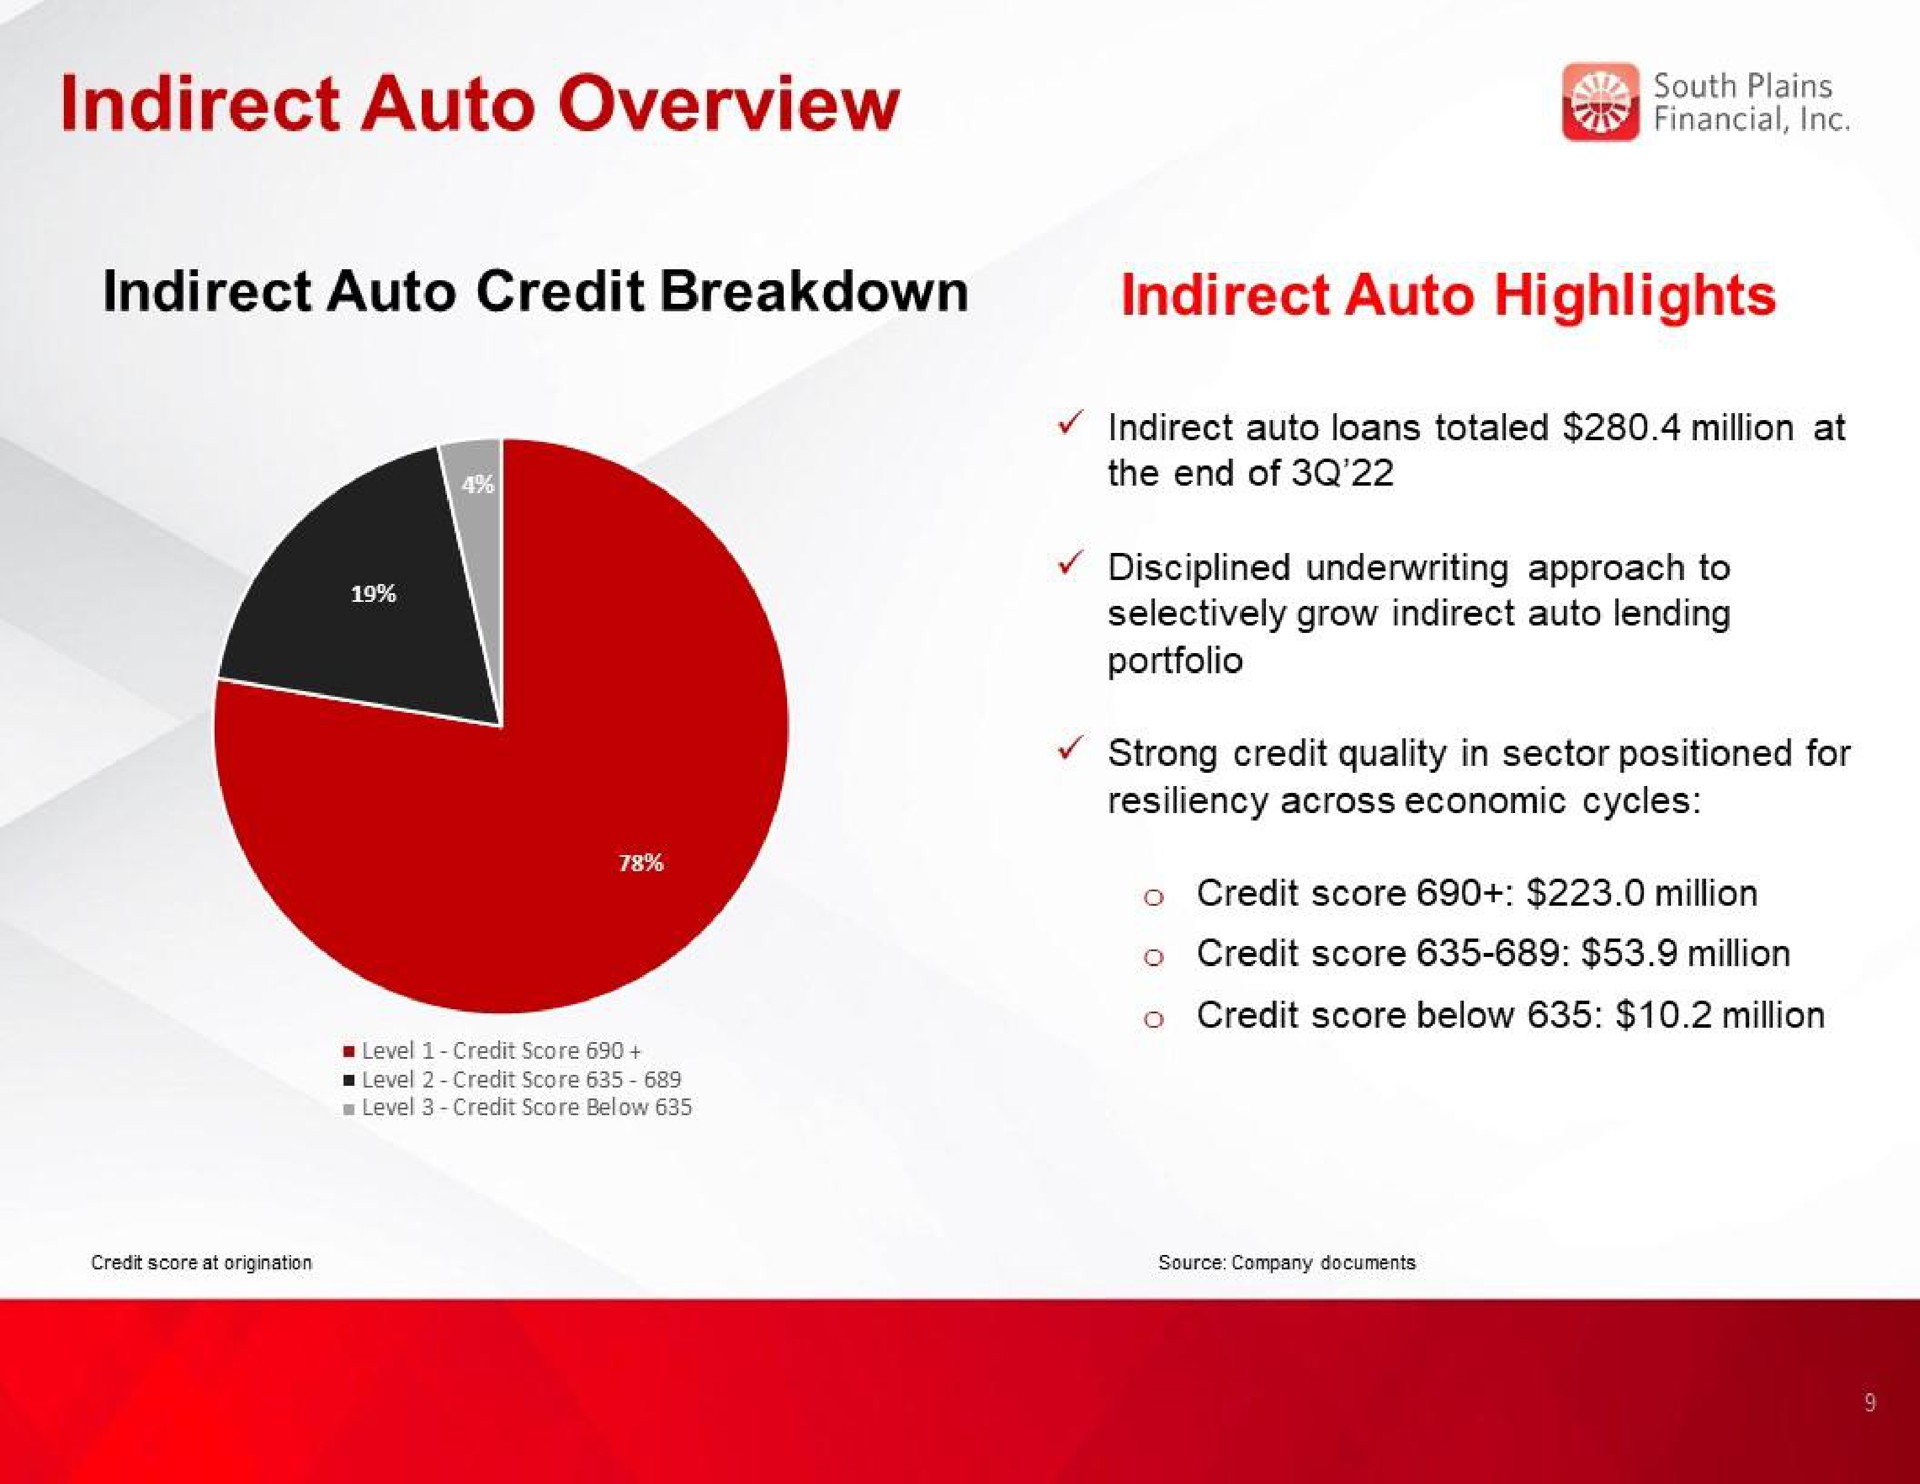 indirect auto overview he indirect auto credit breakdown indirect auto highlights | South Plains Financial